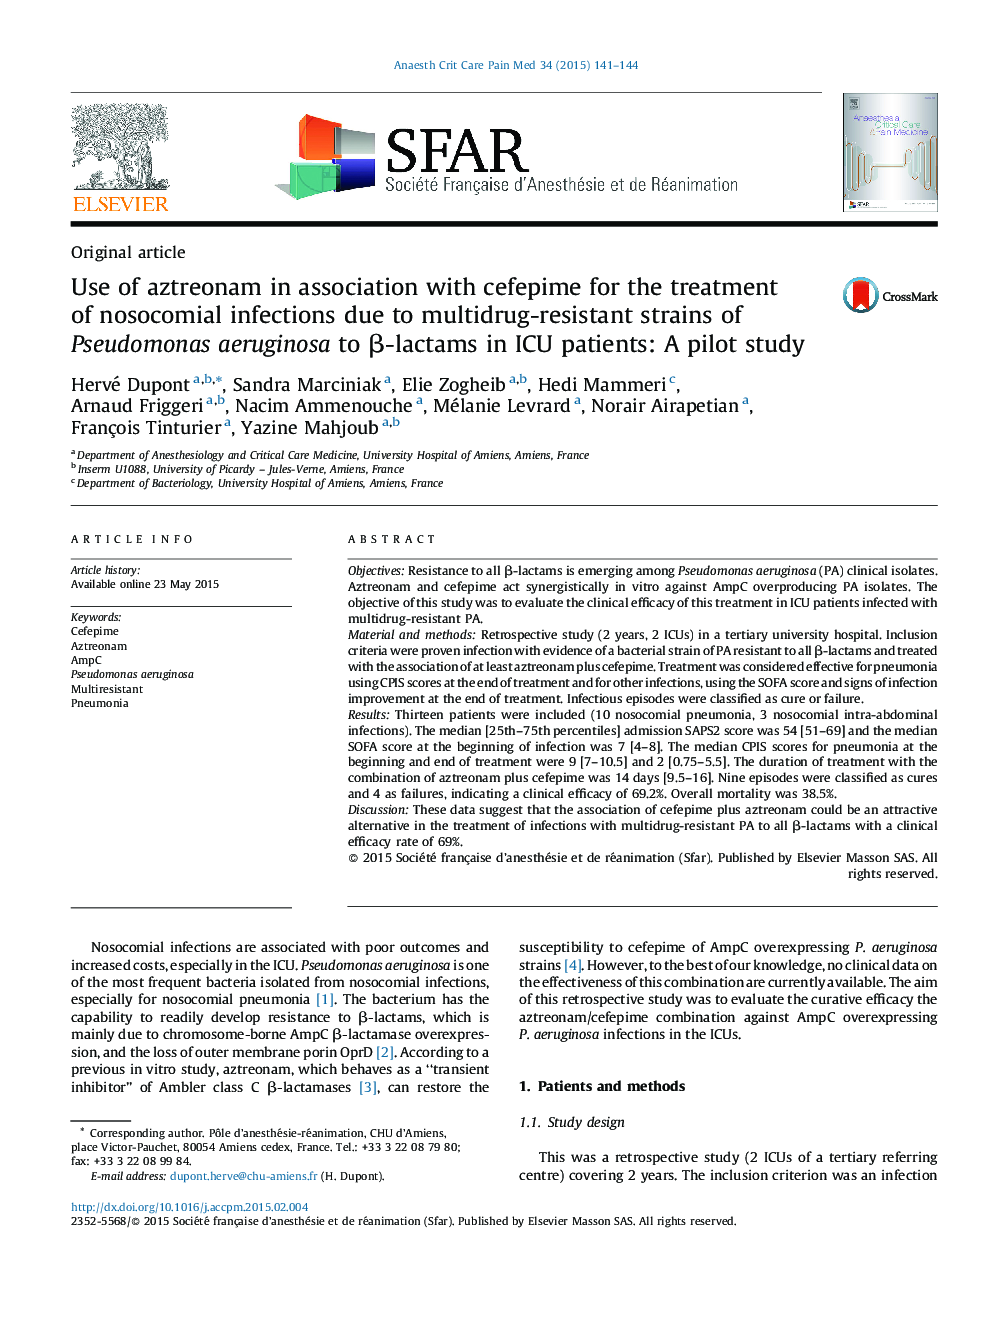 Use of aztreonam in association with cefepime for the treatment of nosocomial infections due to multidrug-resistant strains of Pseudomonas aeruginosa to β-lactams in ICU patients: A pilot study